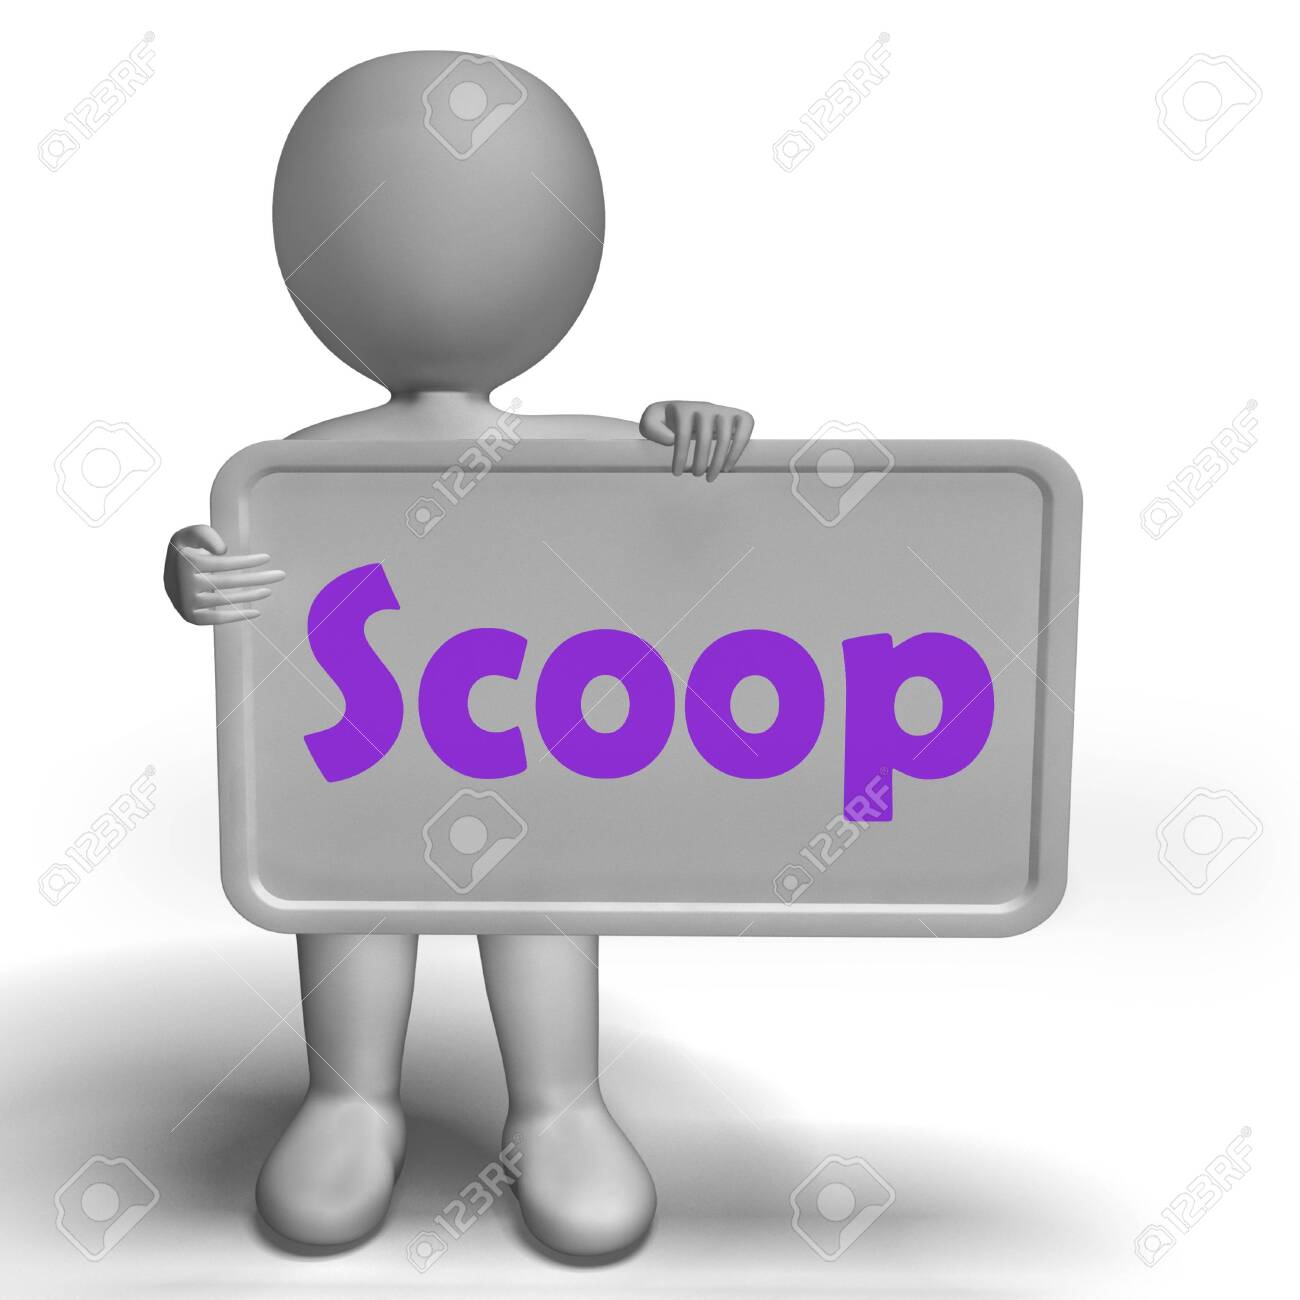 26236282-scoop-sign-meaning-exclusive-information-or-inside-story.jpg